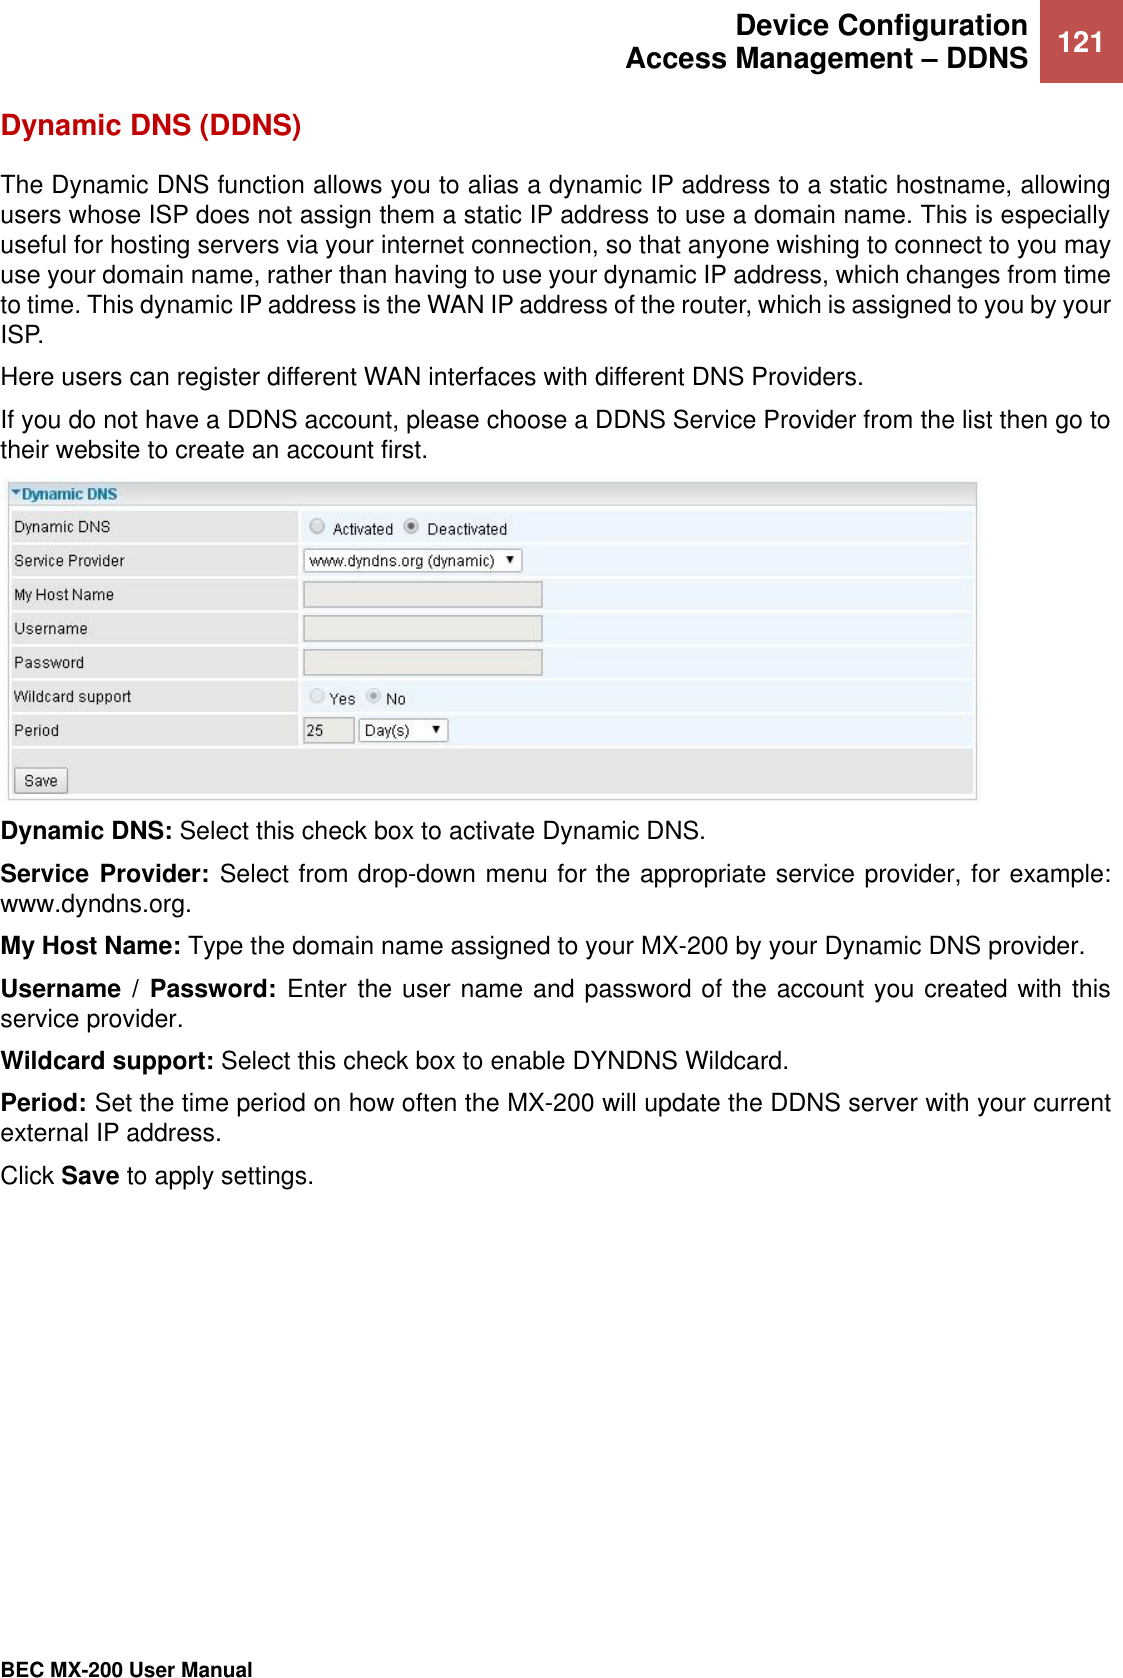  Device Configuration Access Management – DDNS 121   BEC MX-200 User Manual  Dynamic DNS (DDNS) The Dynamic DNS function allows you to alias a dynamic IP address to a static hostname, allowing users whose ISP does not assign them a static IP address to use a domain name. This is especially useful for hosting servers via your internet connection, so that anyone wishing to connect to you may use your domain name, rather than having to use your dynamic IP address, which changes from time to time. This dynamic IP address is the WAN IP address of the router, which is assigned to you by your ISP. Here users can register different WAN interfaces with different DNS Providers. If you do not have a DDNS account, please choose a DDNS Service Provider from the list then go to their website to create an account first.    Dynamic DNS: Select this check box to activate Dynamic DNS. Service Provider: Select from drop-down menu for the appropriate service provider, for example: www.dyndns.org. My Host Name: Type the domain name assigned to your MX-200 by your Dynamic DNS provider. Username /  Password:  Enter the user name and password of the account you created with this service provider.  Wildcard support: Select this check box to enable DYNDNS Wildcard. Period: Set the time period on how often the MX-200 will update the DDNS server with your current external IP address.  Click Save to apply settings.   